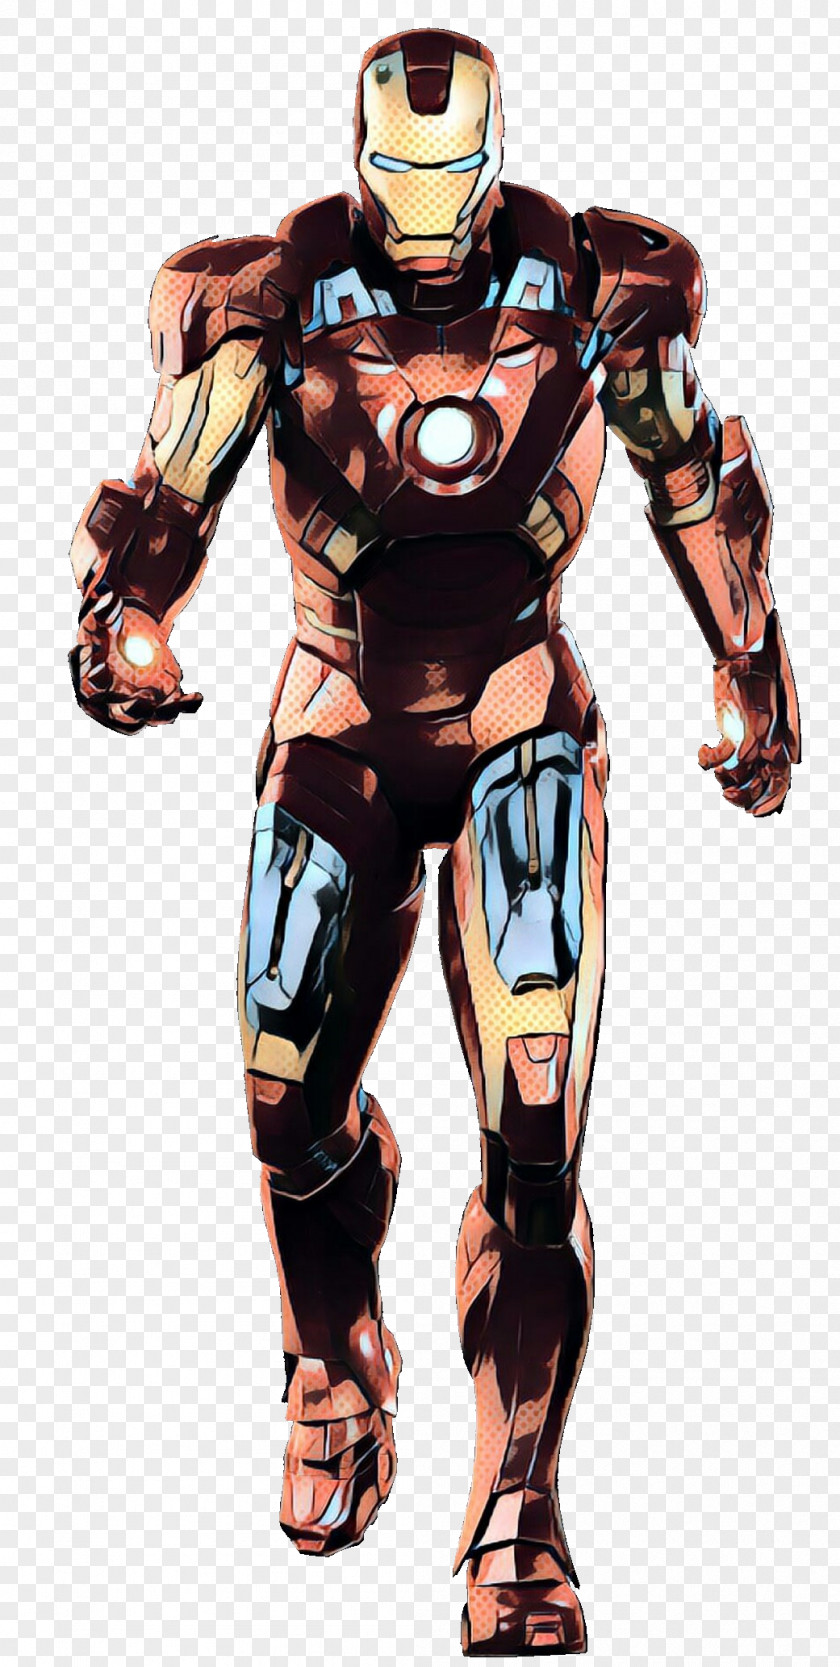 Iron Man's Armor Portable Network Graphics Marvel Cinematic Universe Image PNG